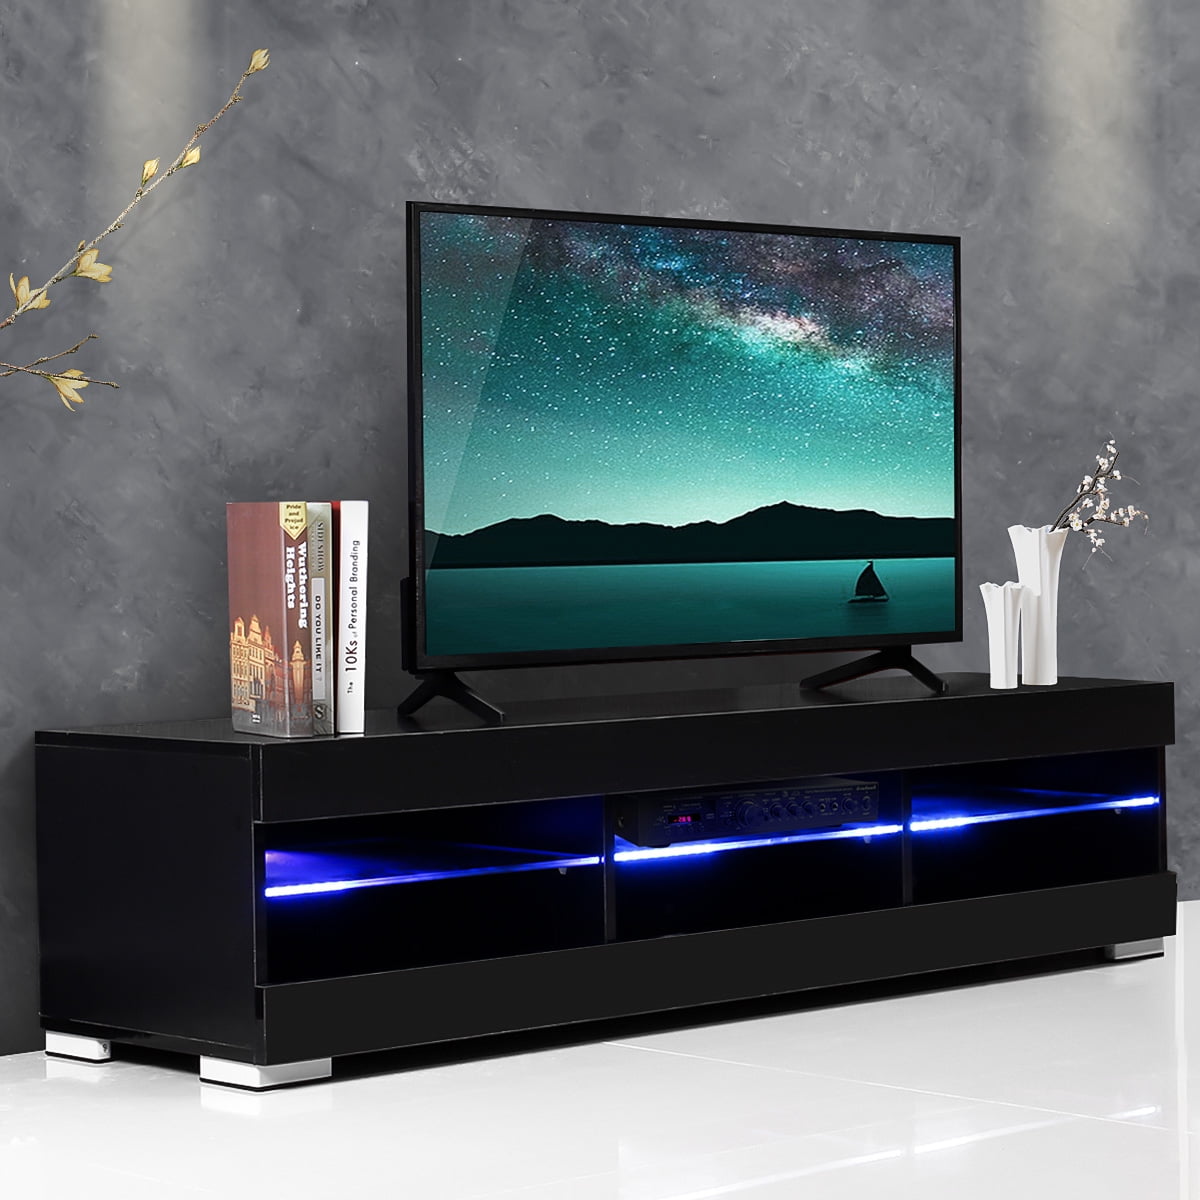 57 TV Stand Modern Decorative Cabinet With Multi mode LED Lights 